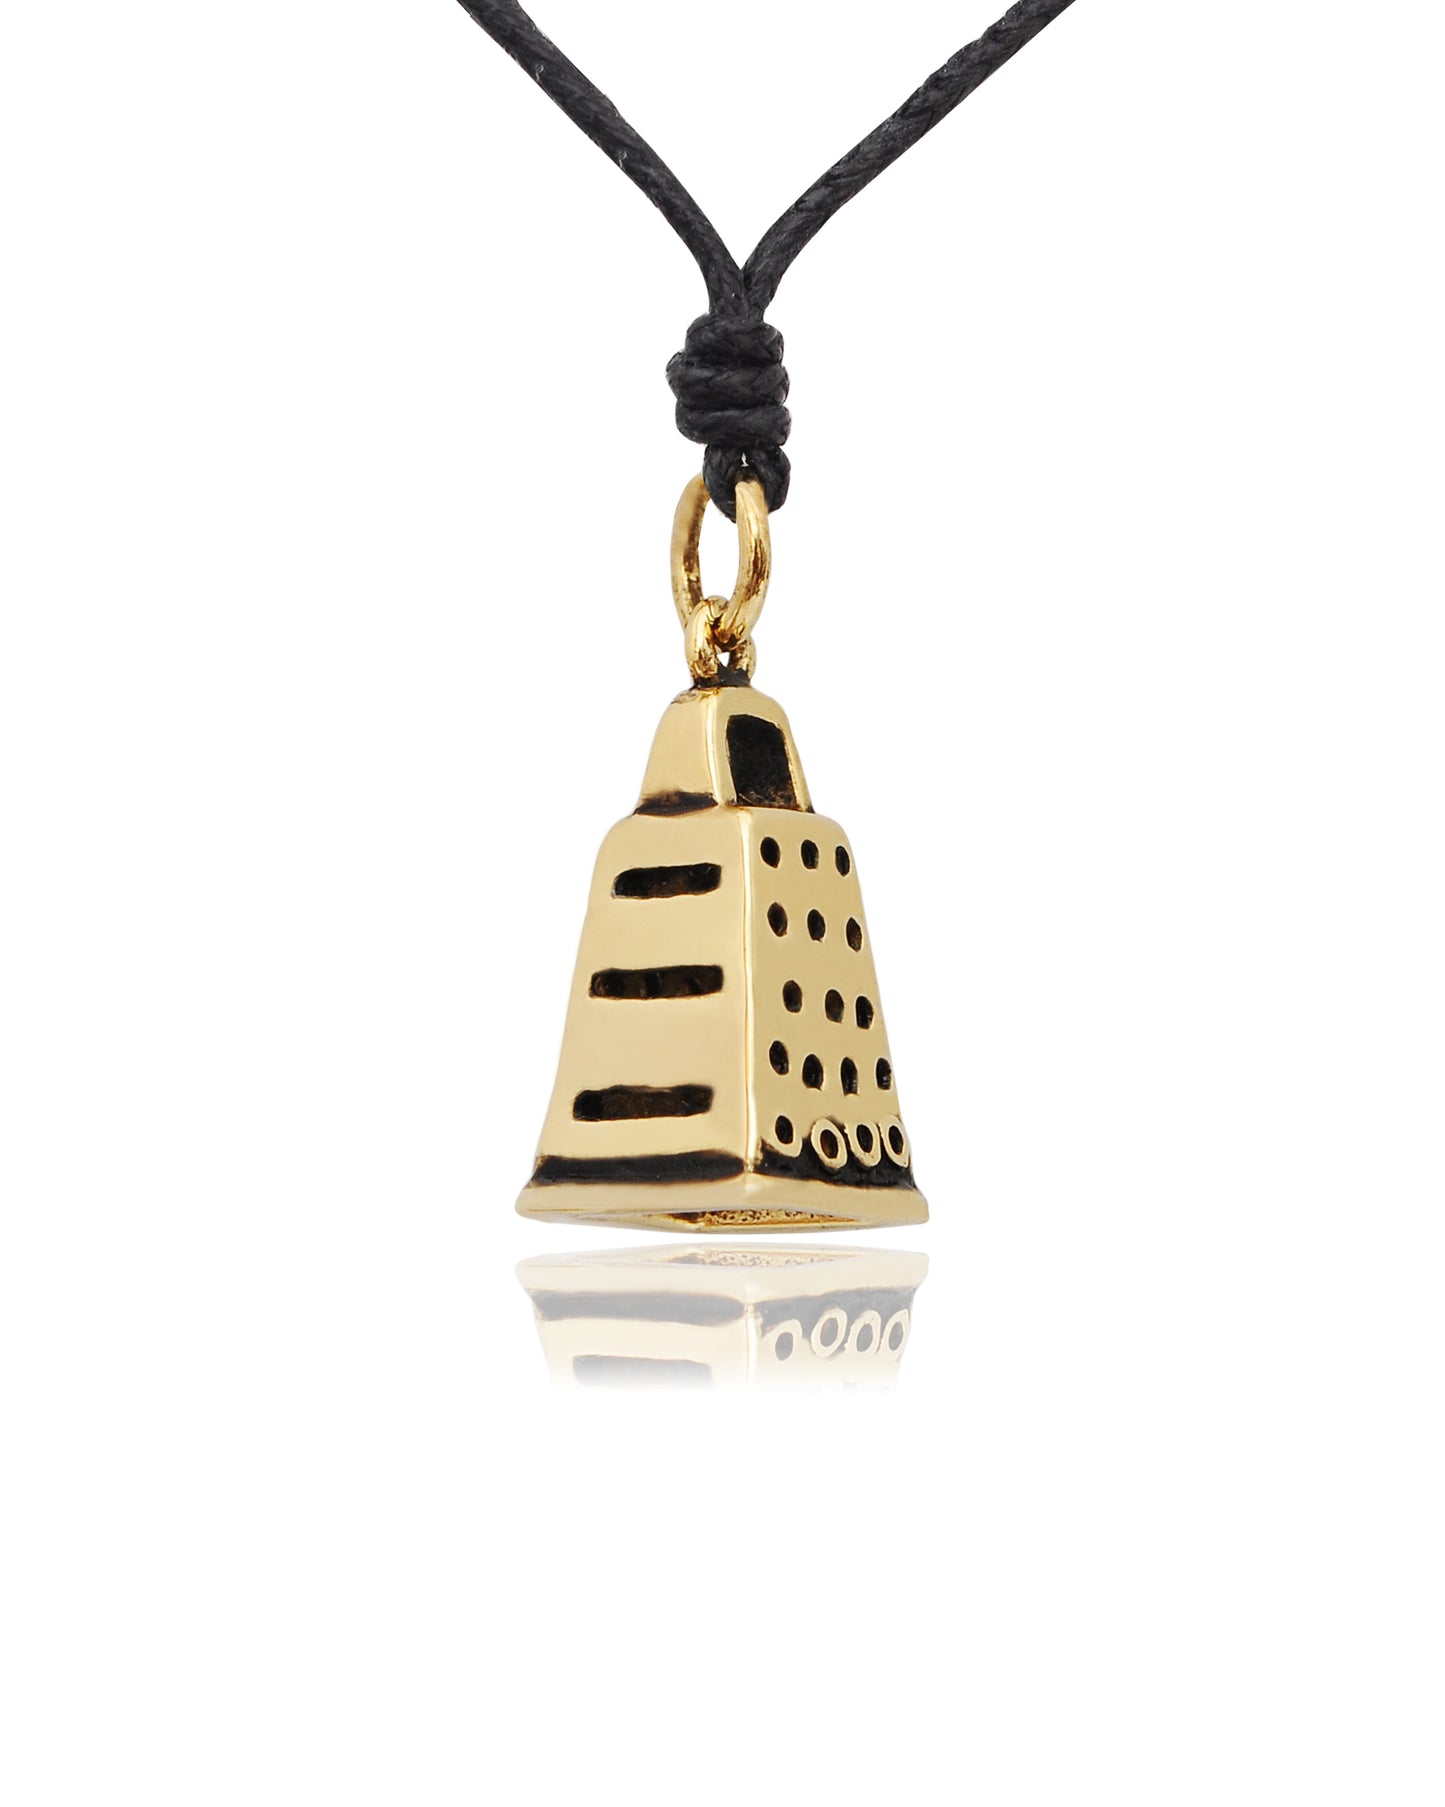 Cheese Grater Chef Brass Gold Charm Necklace Pendant Jewelry